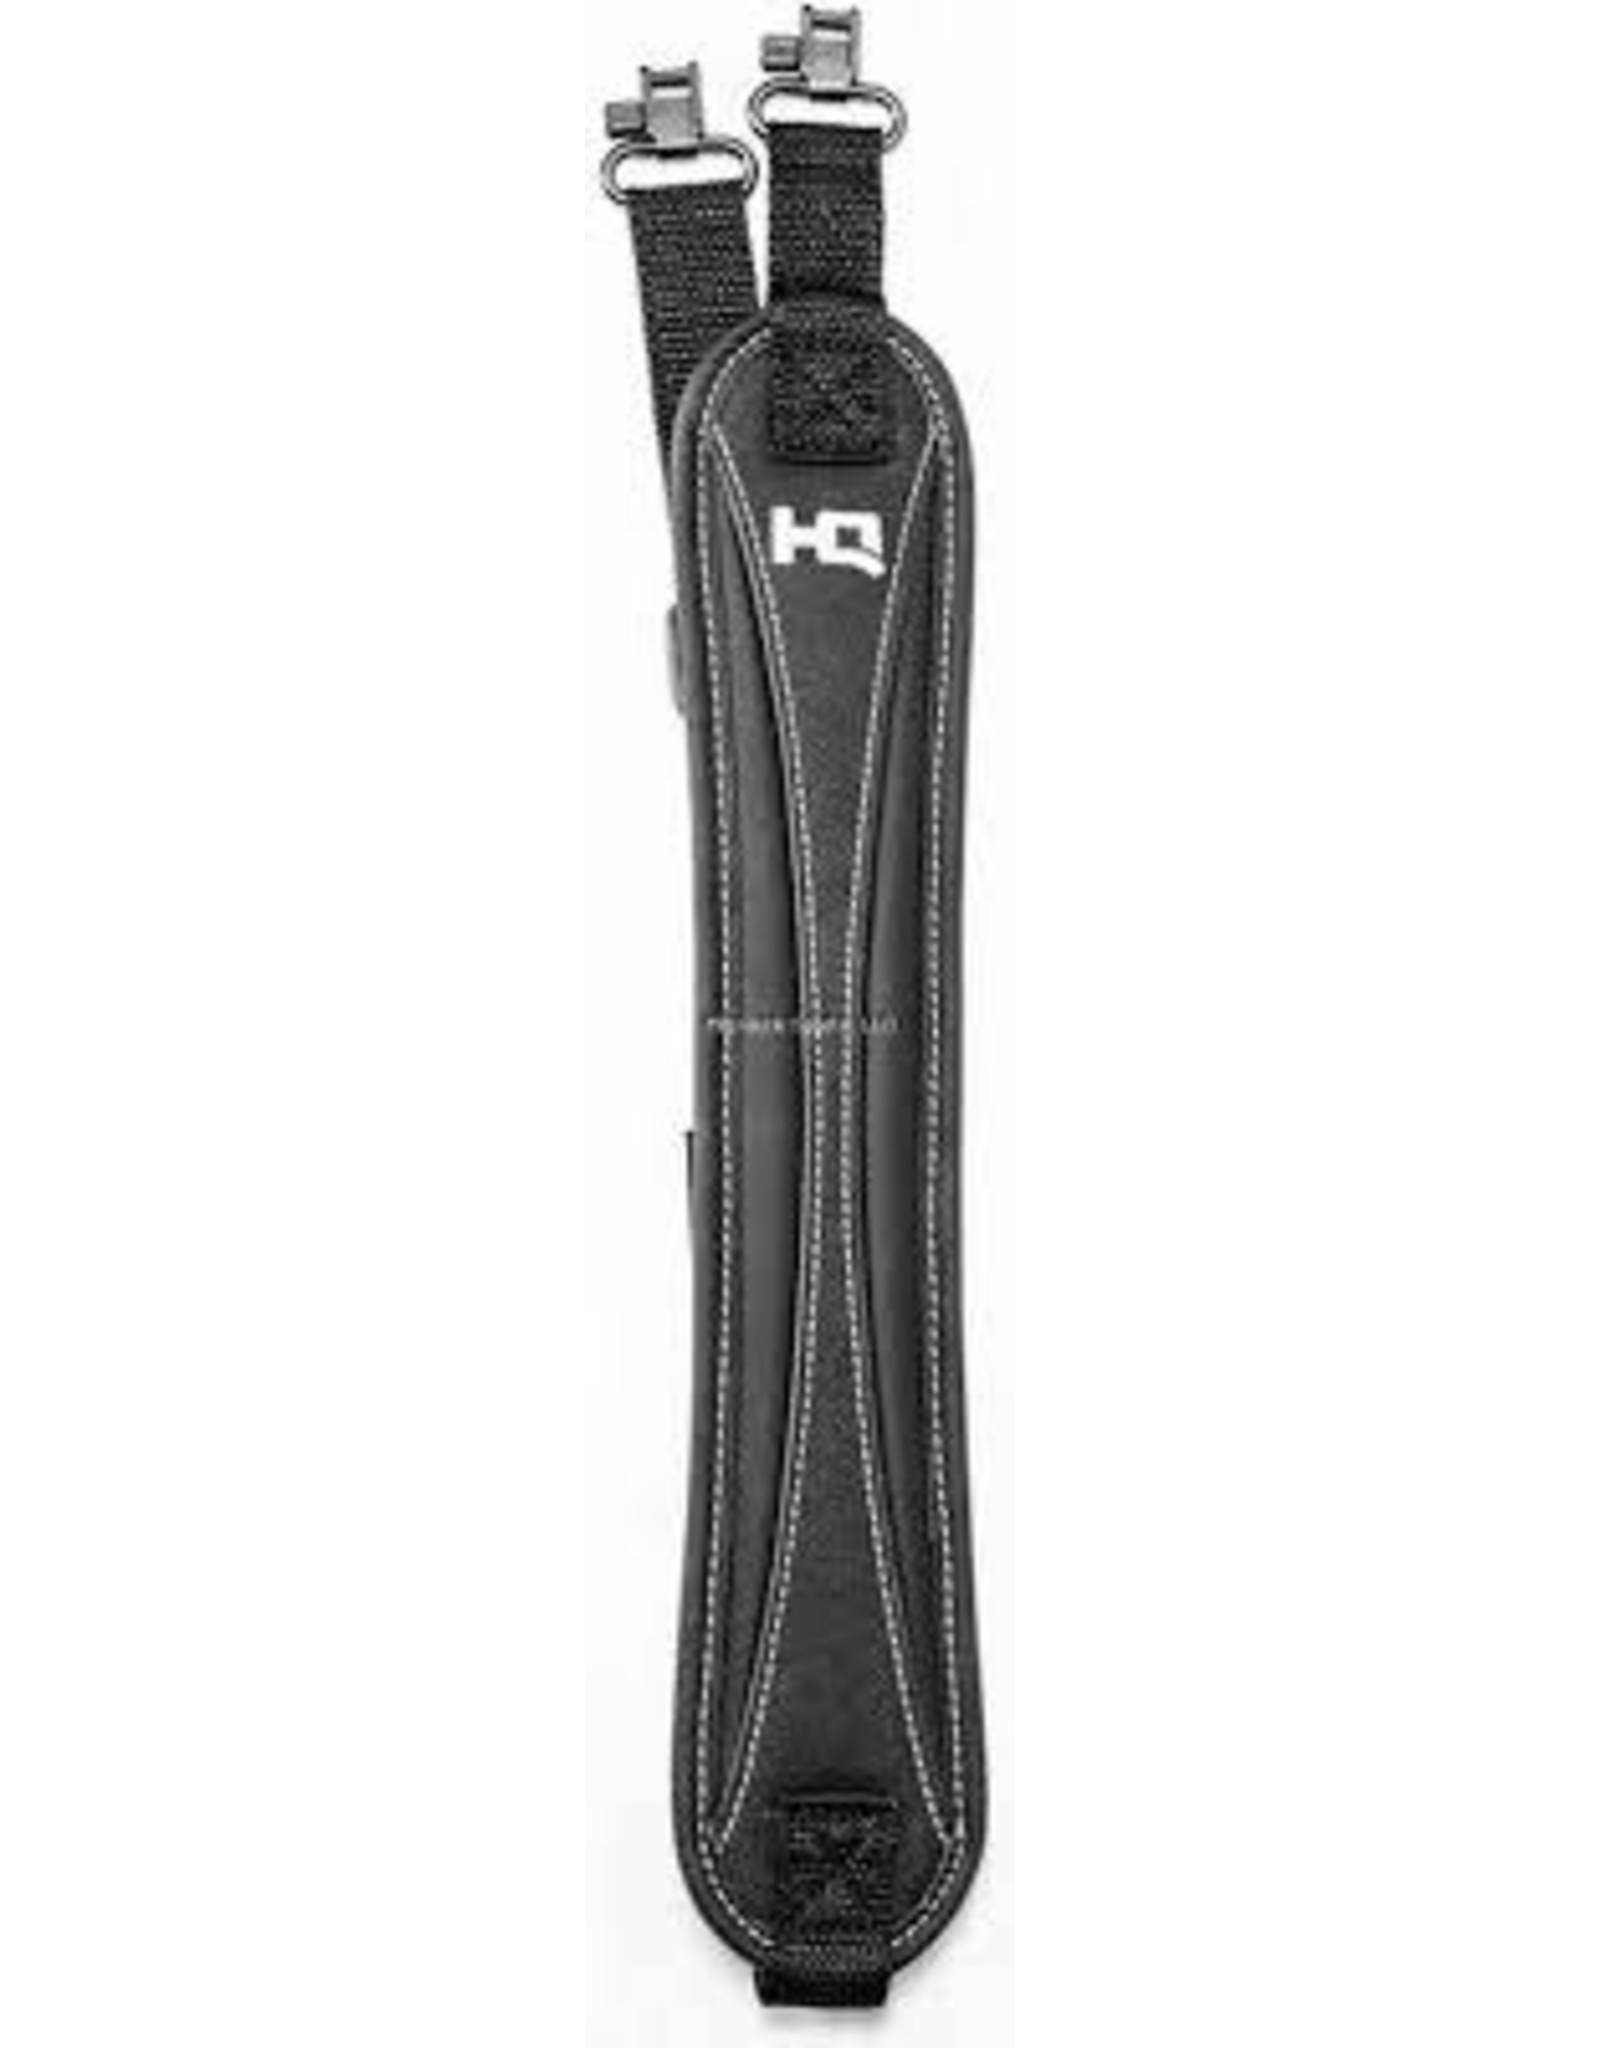 HQ Outfitters HQ Outfitters  EVA Comfort Contoured Sling with swivels, Black HQ-EVS-BK